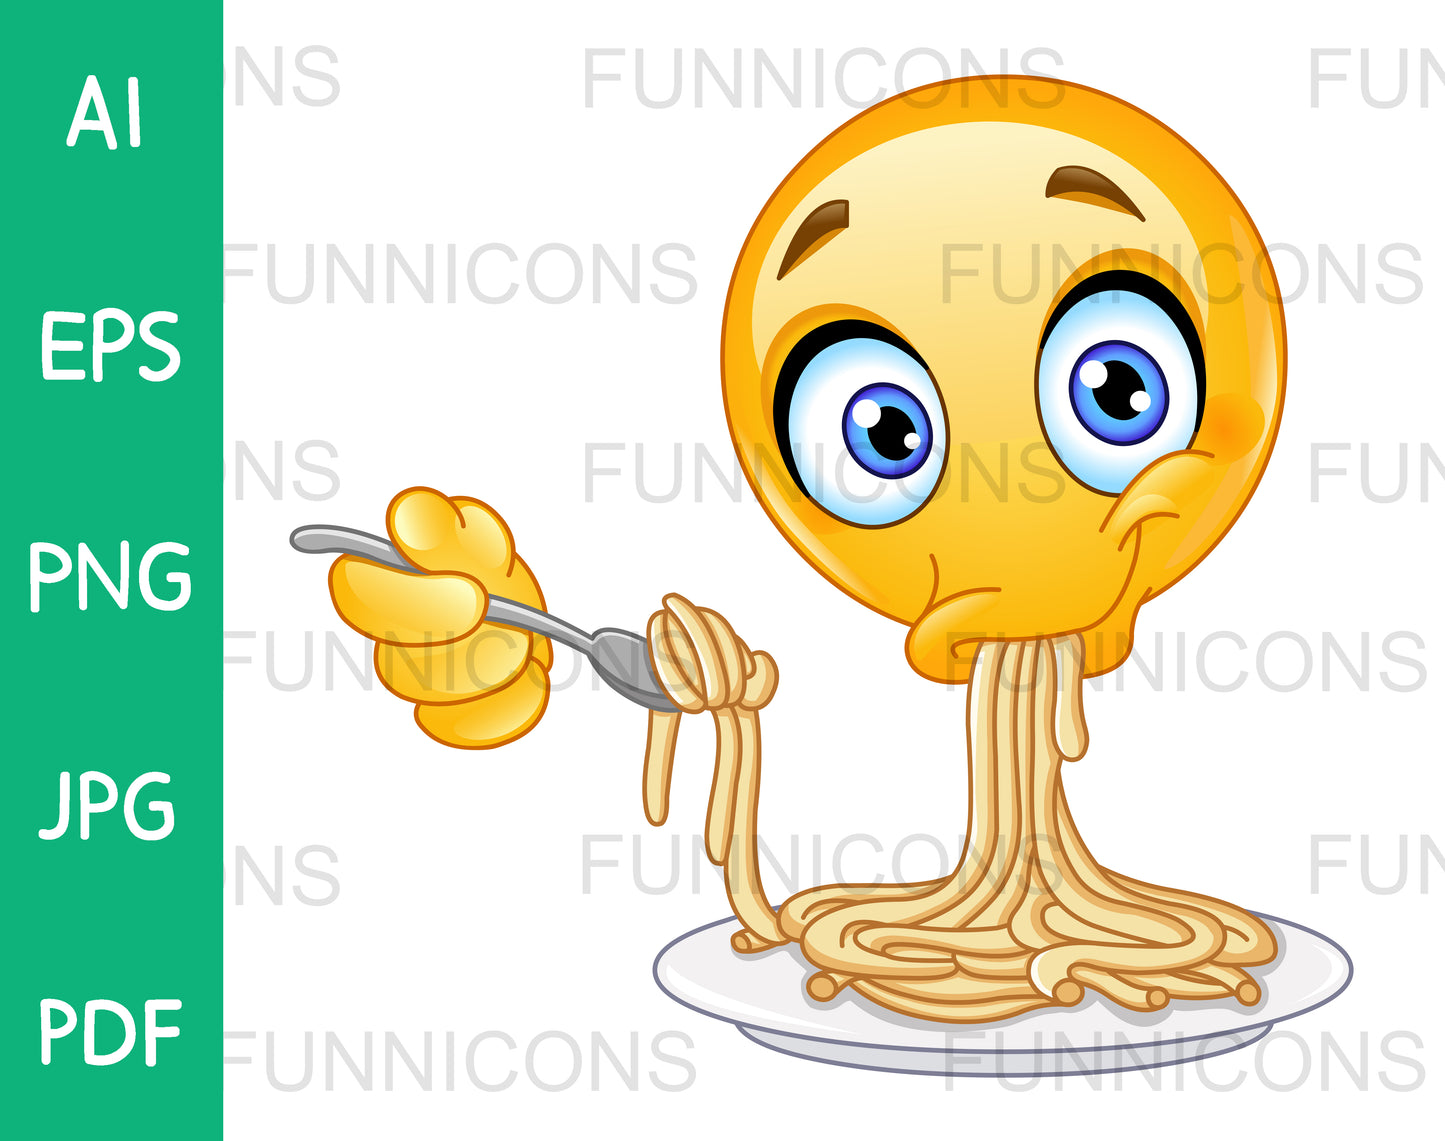 Hungry Emoji Eating Spaghetti from a Plate using a Spoon